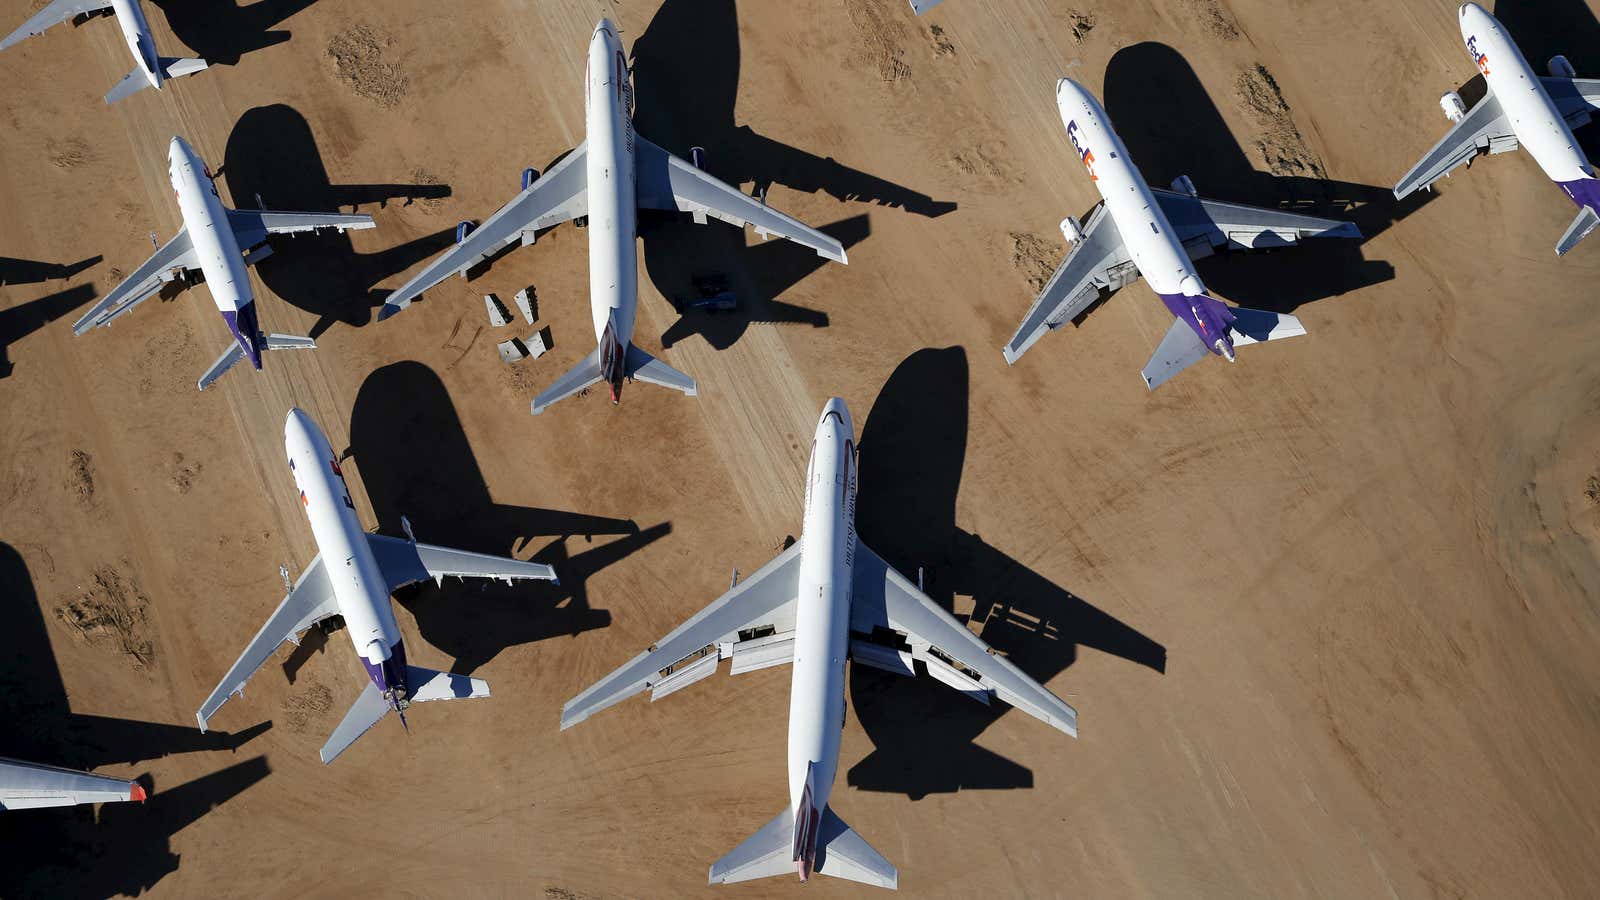 Old airplanes, including Boeing 747-400s, are stored in the desert in Victorville, California March 13, 2015. Last year, there were zero orders placed by commercial…